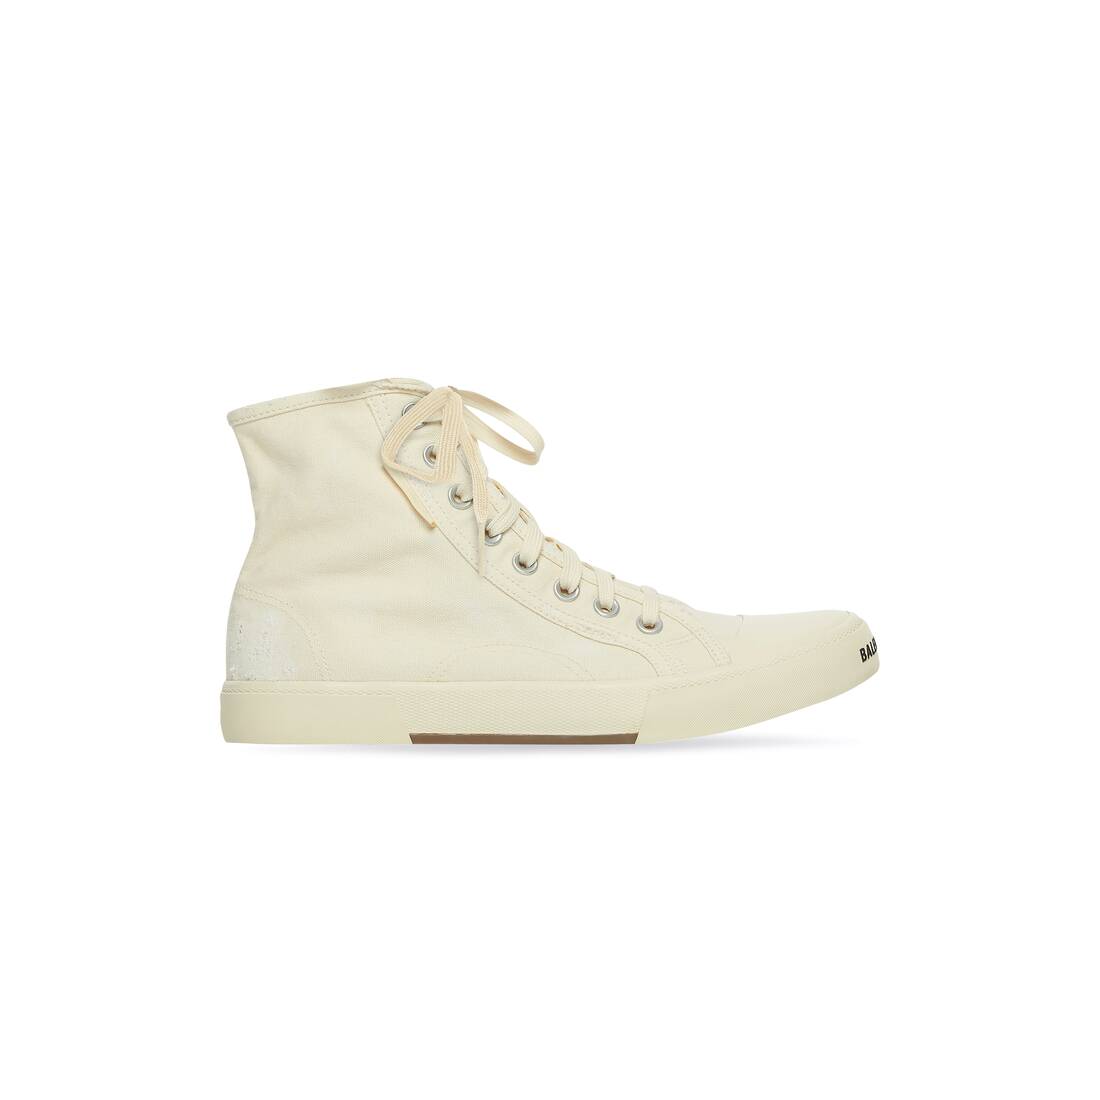 Paris High Top Sneaker in white destroyed cotton and white sole